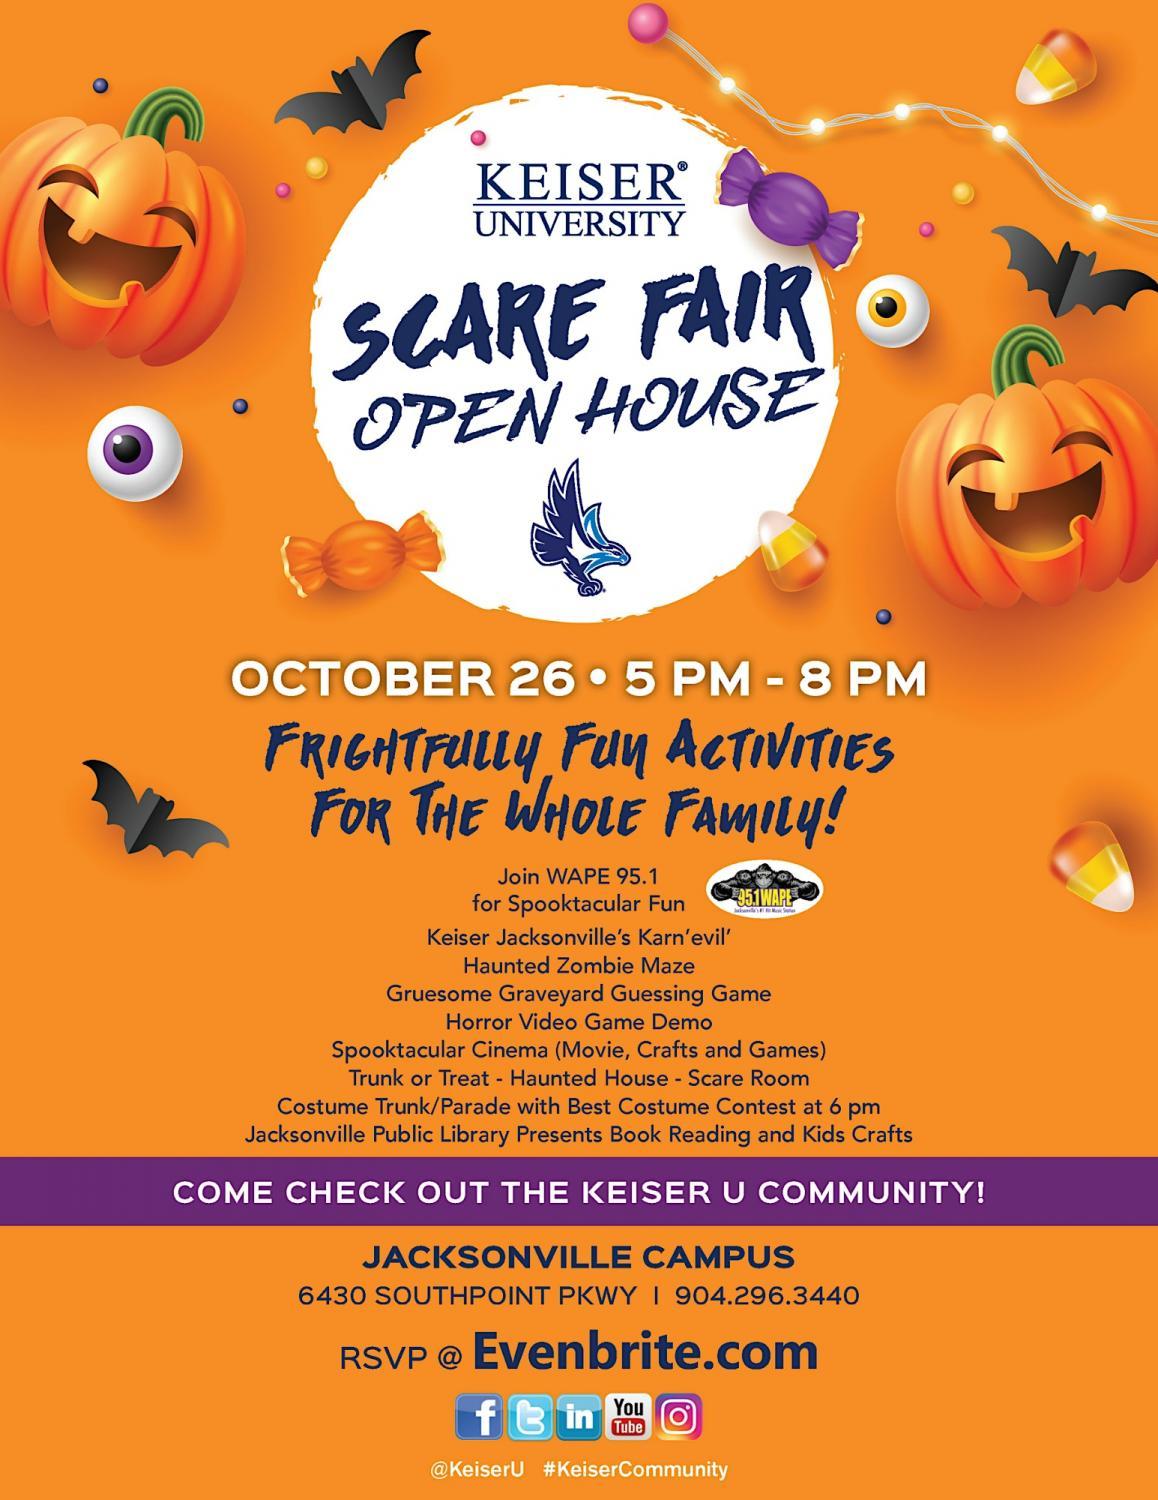 Scare Fair - Open House
Wed Oct 26, 7:00 PM - Wed Oct 26, 7:00 PM
in 6 days